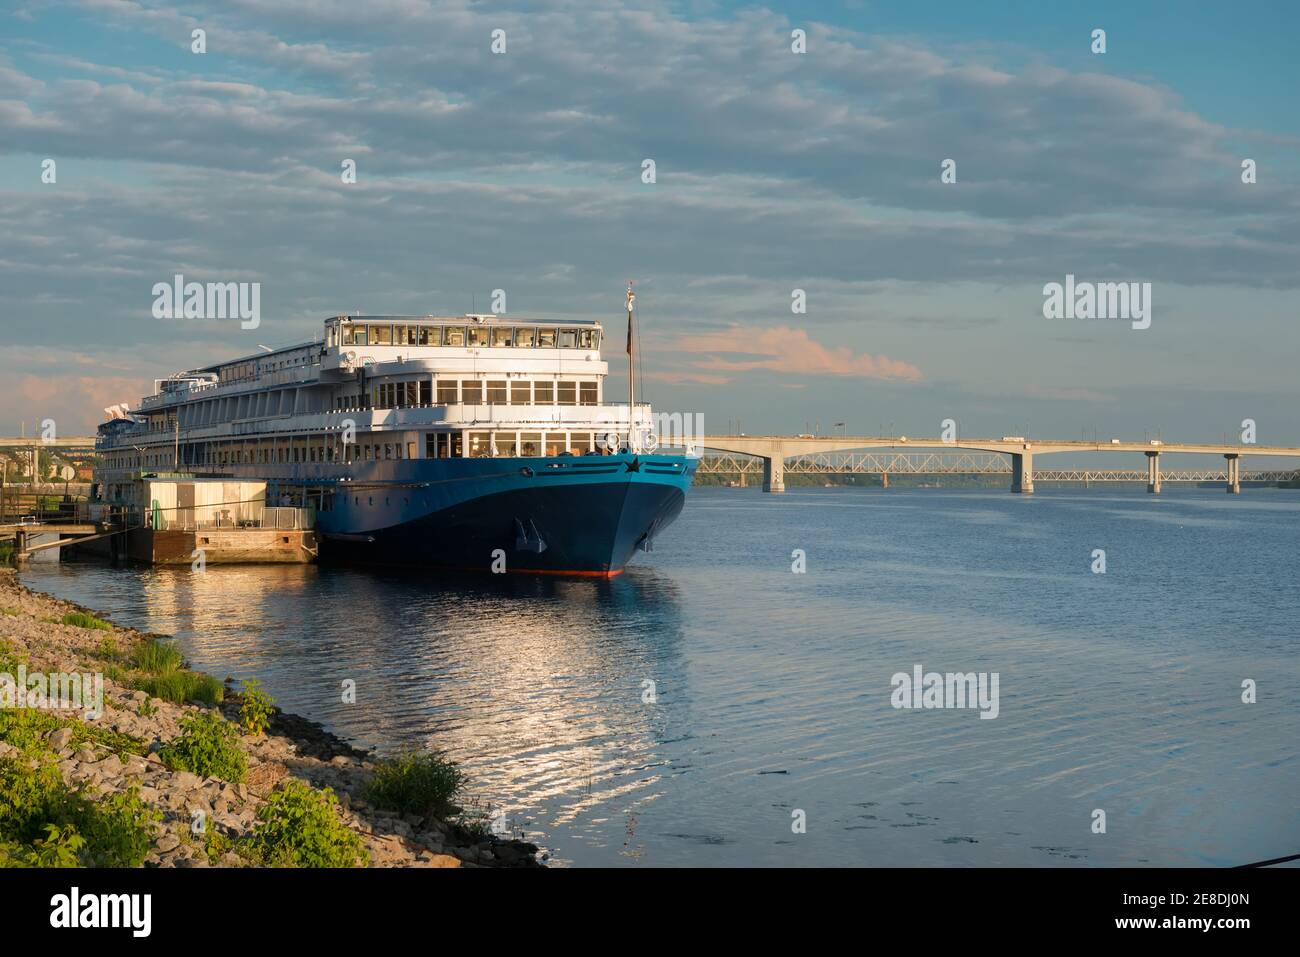 Cruise ship at the pier on the Volga river in the city of Kostroma on a summer evening Stock Photo